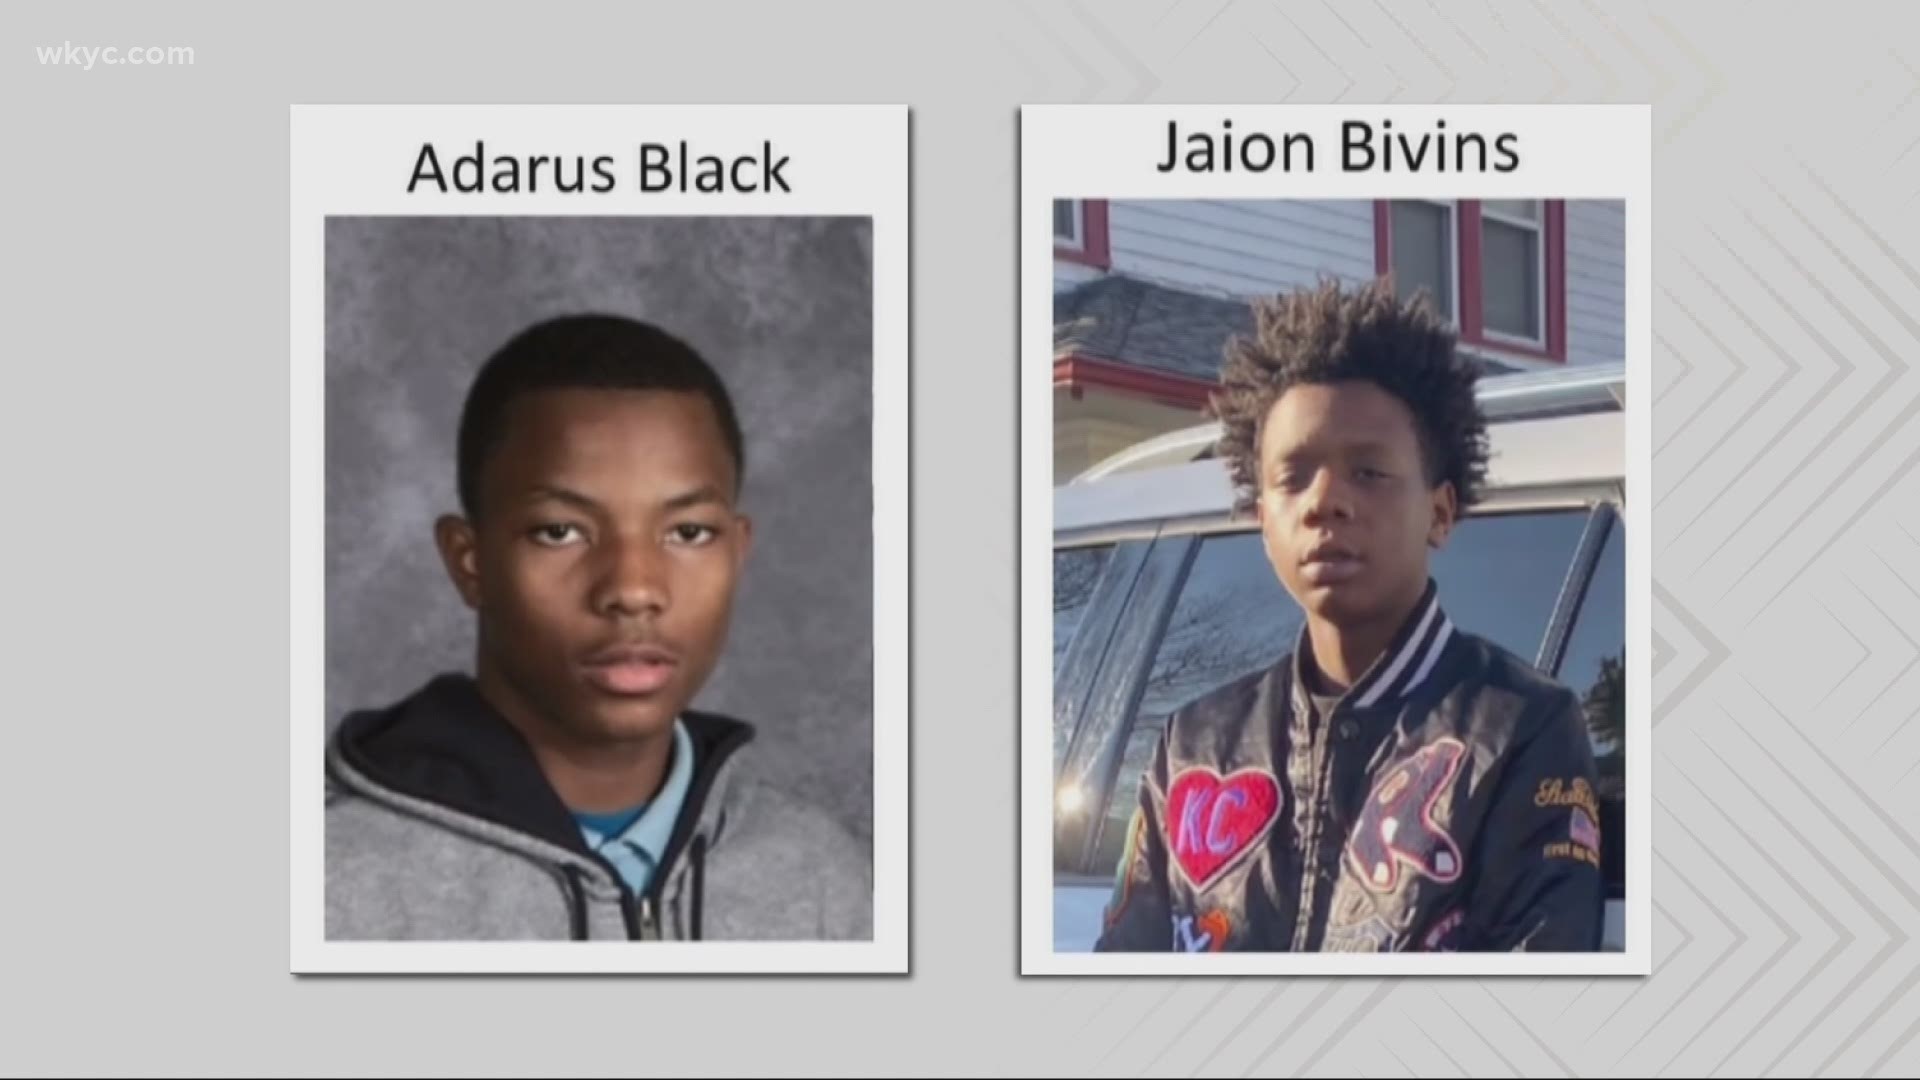 Police are still searching for 17-year-old Adarus Black. A reward is available for information leading to his arrest and prosecution.